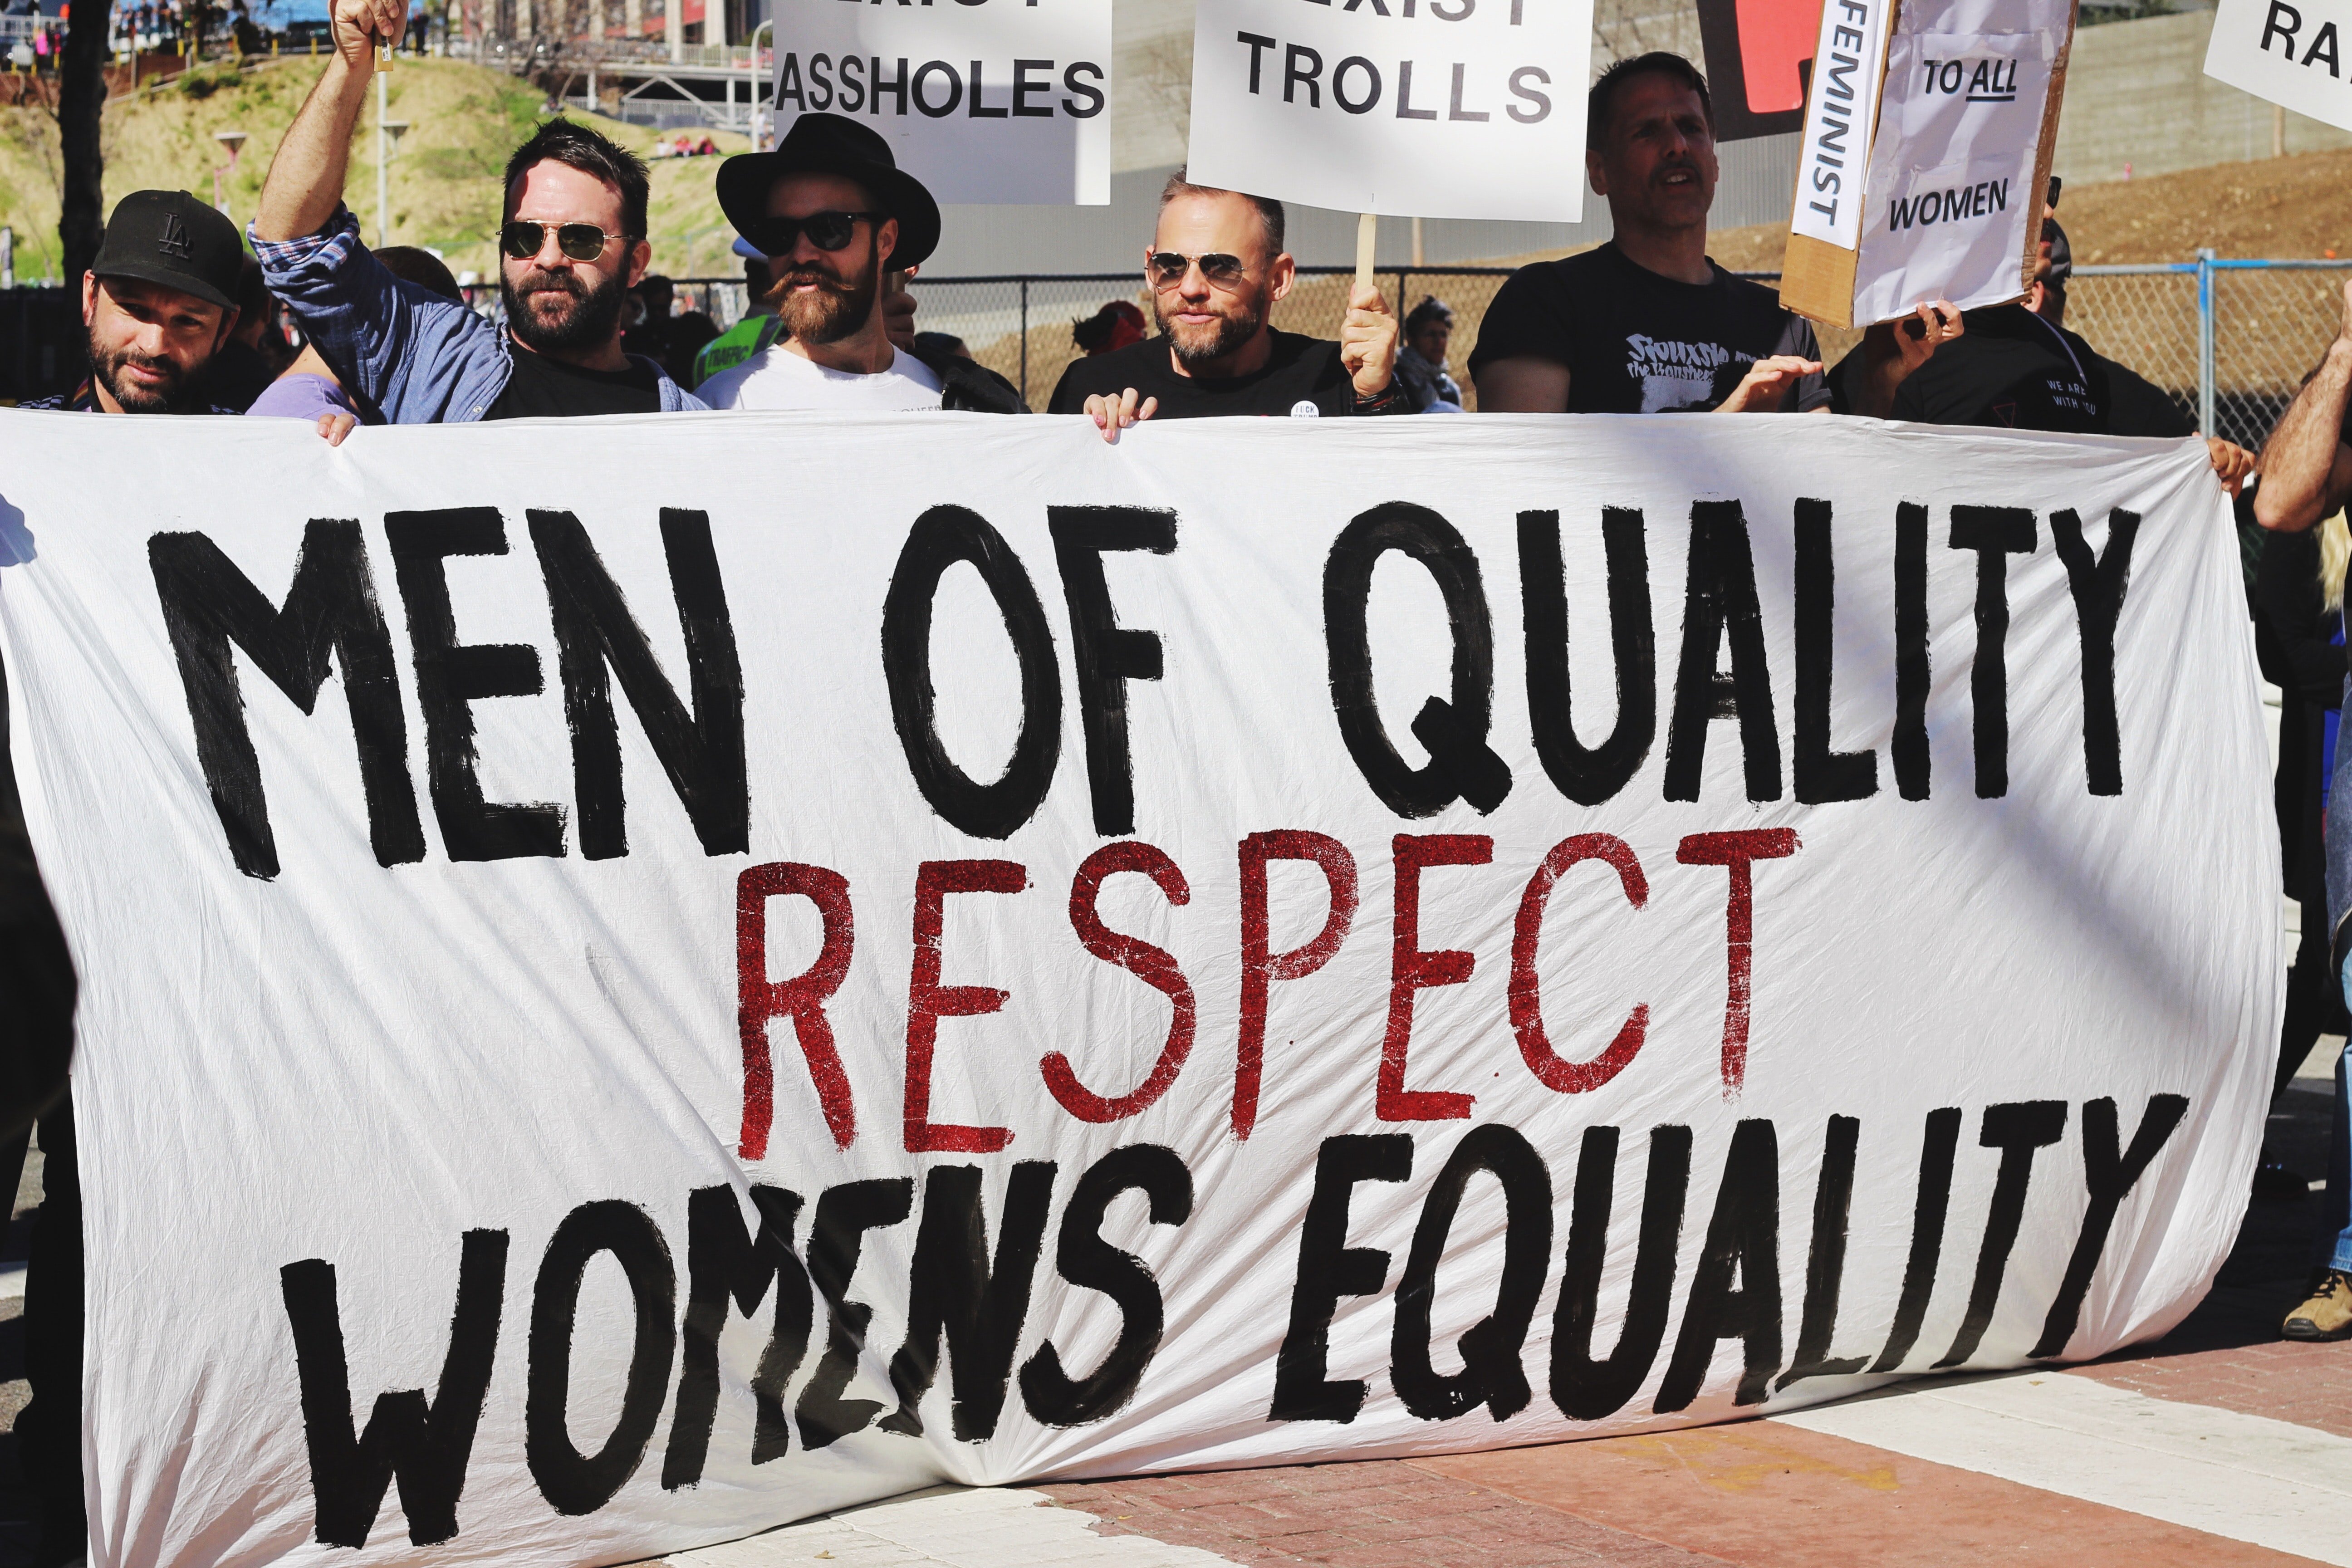 Shot from the 2017 Women’s March in Los Angeles. | Source: Unsplash